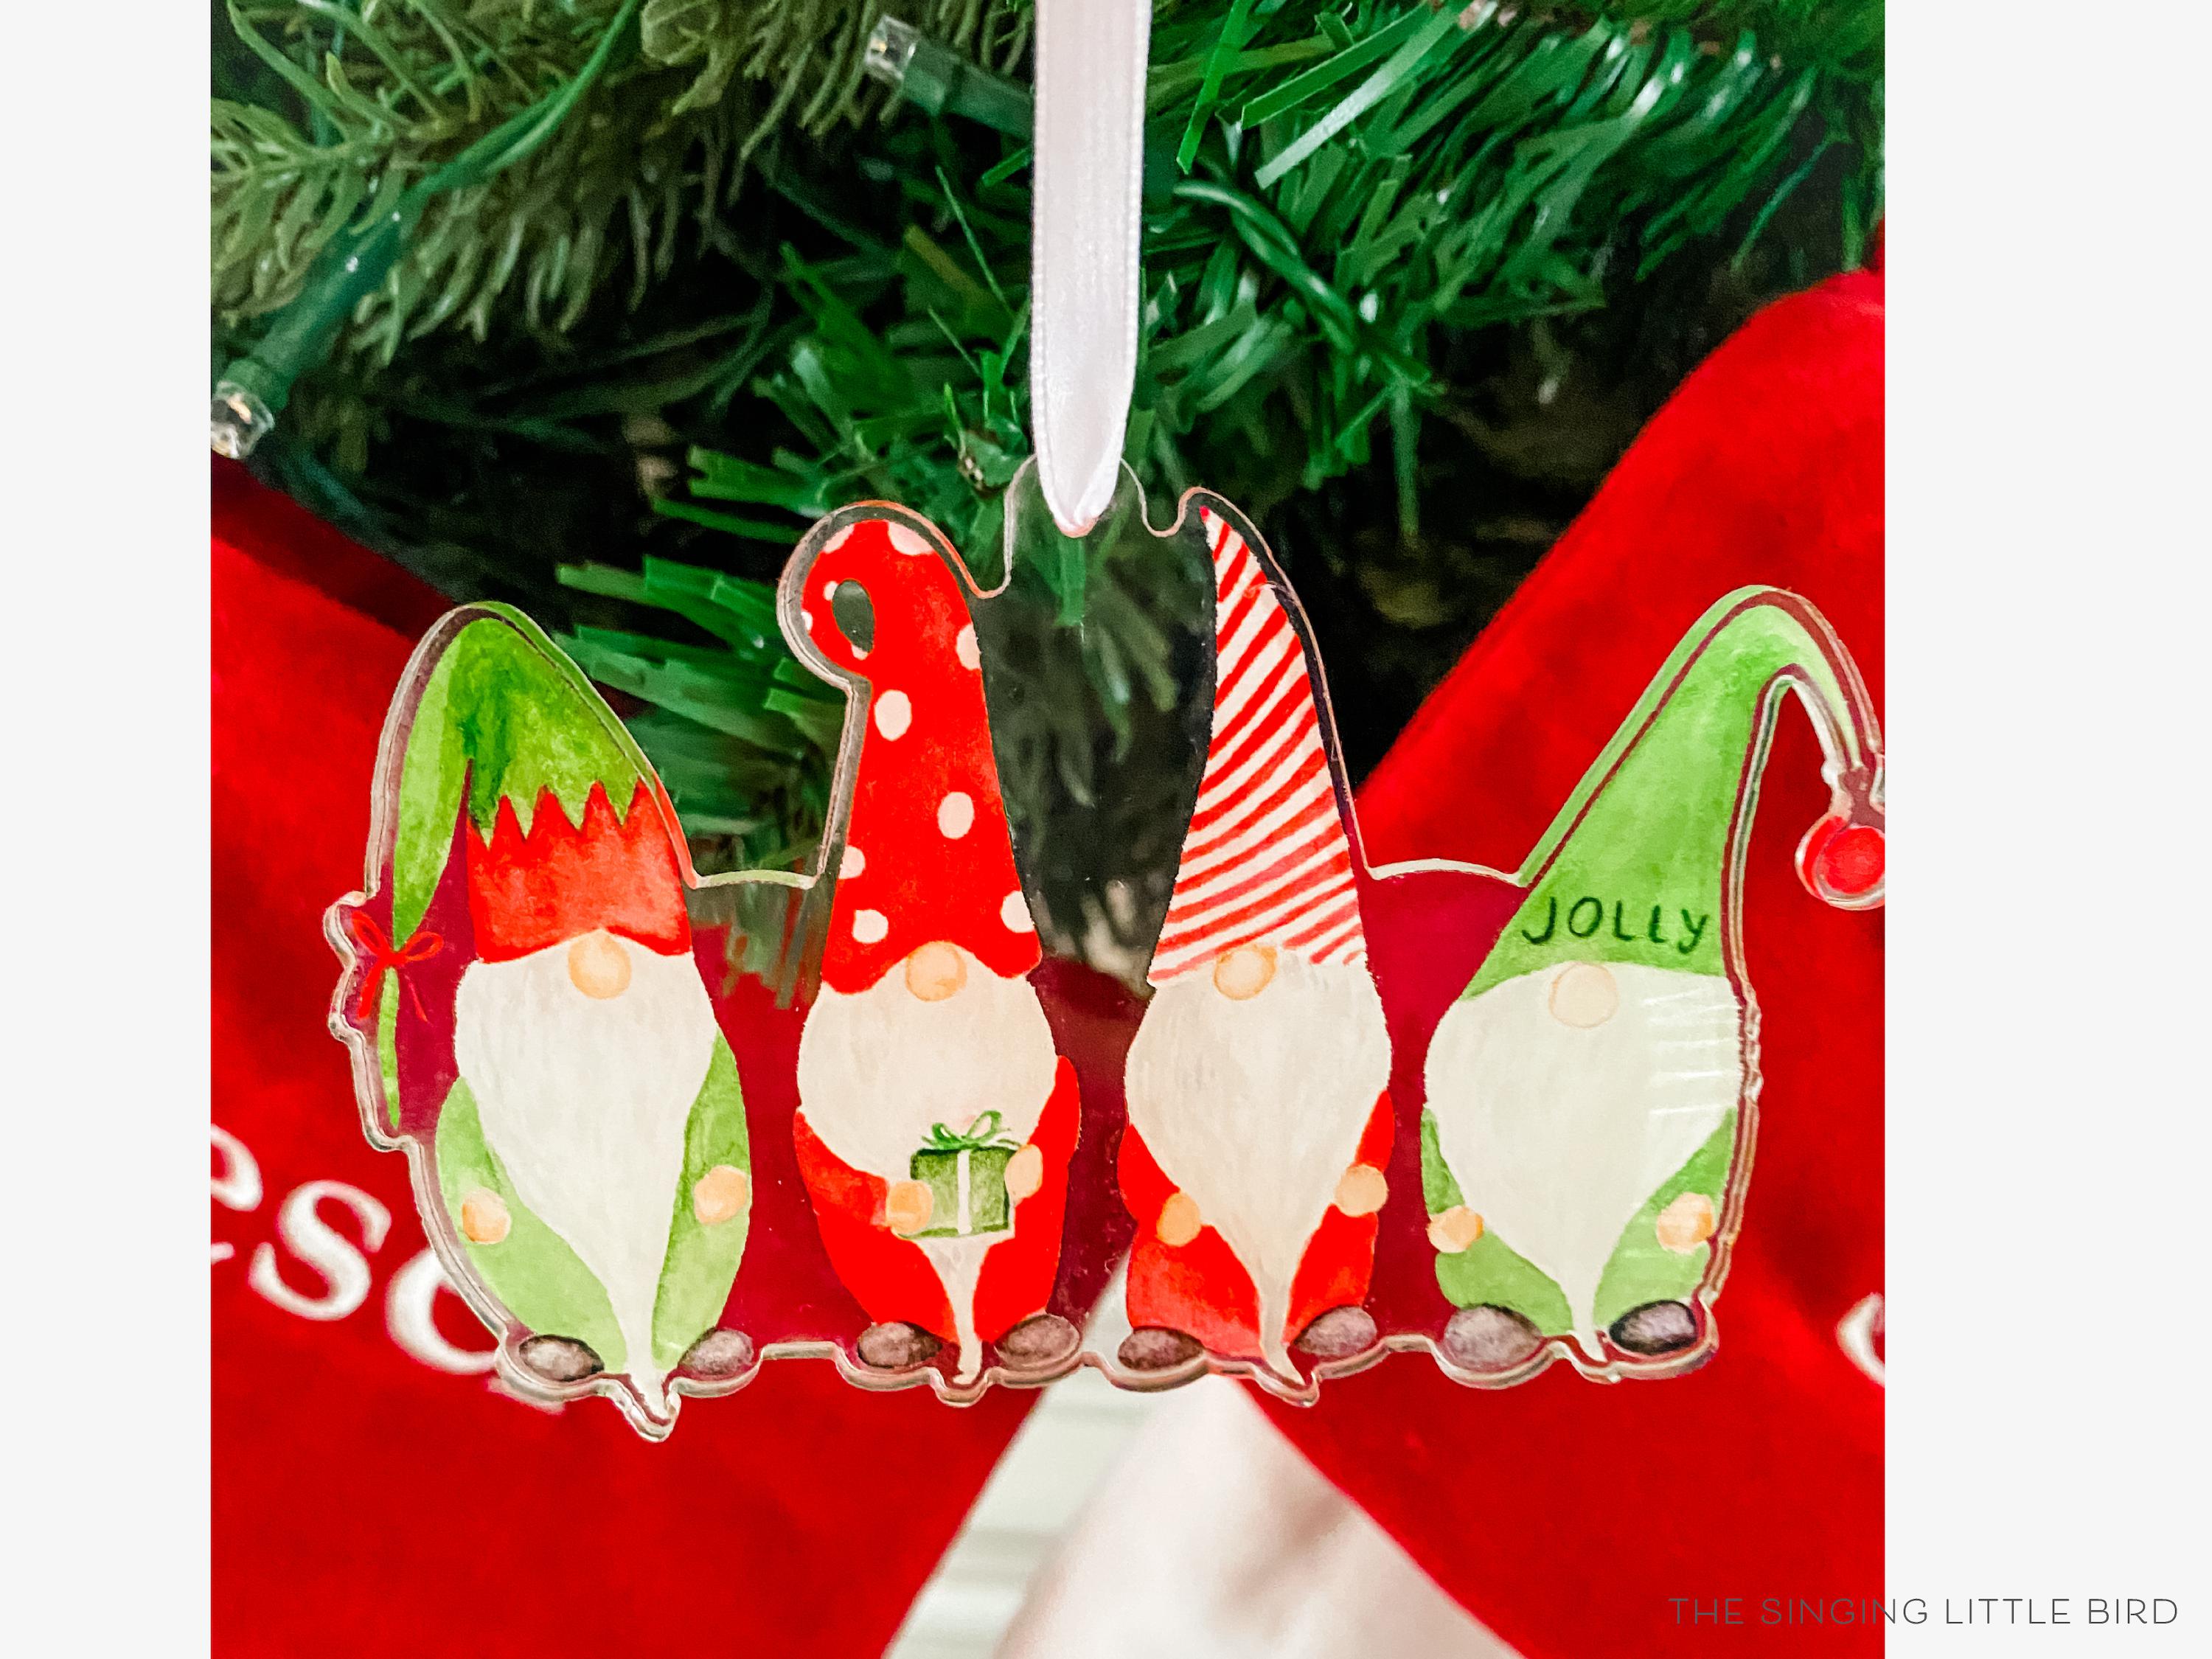 Christmas Gnomes Acrylic Ornament-These acrylic ornaments feature our hand-painted watercolor gnomes. They include a white silk ribbon and measure approximately 4" on its longest side, making a great addition to your Christmas tree or gift for the gnome lover in your life.-The Singing Little Bird